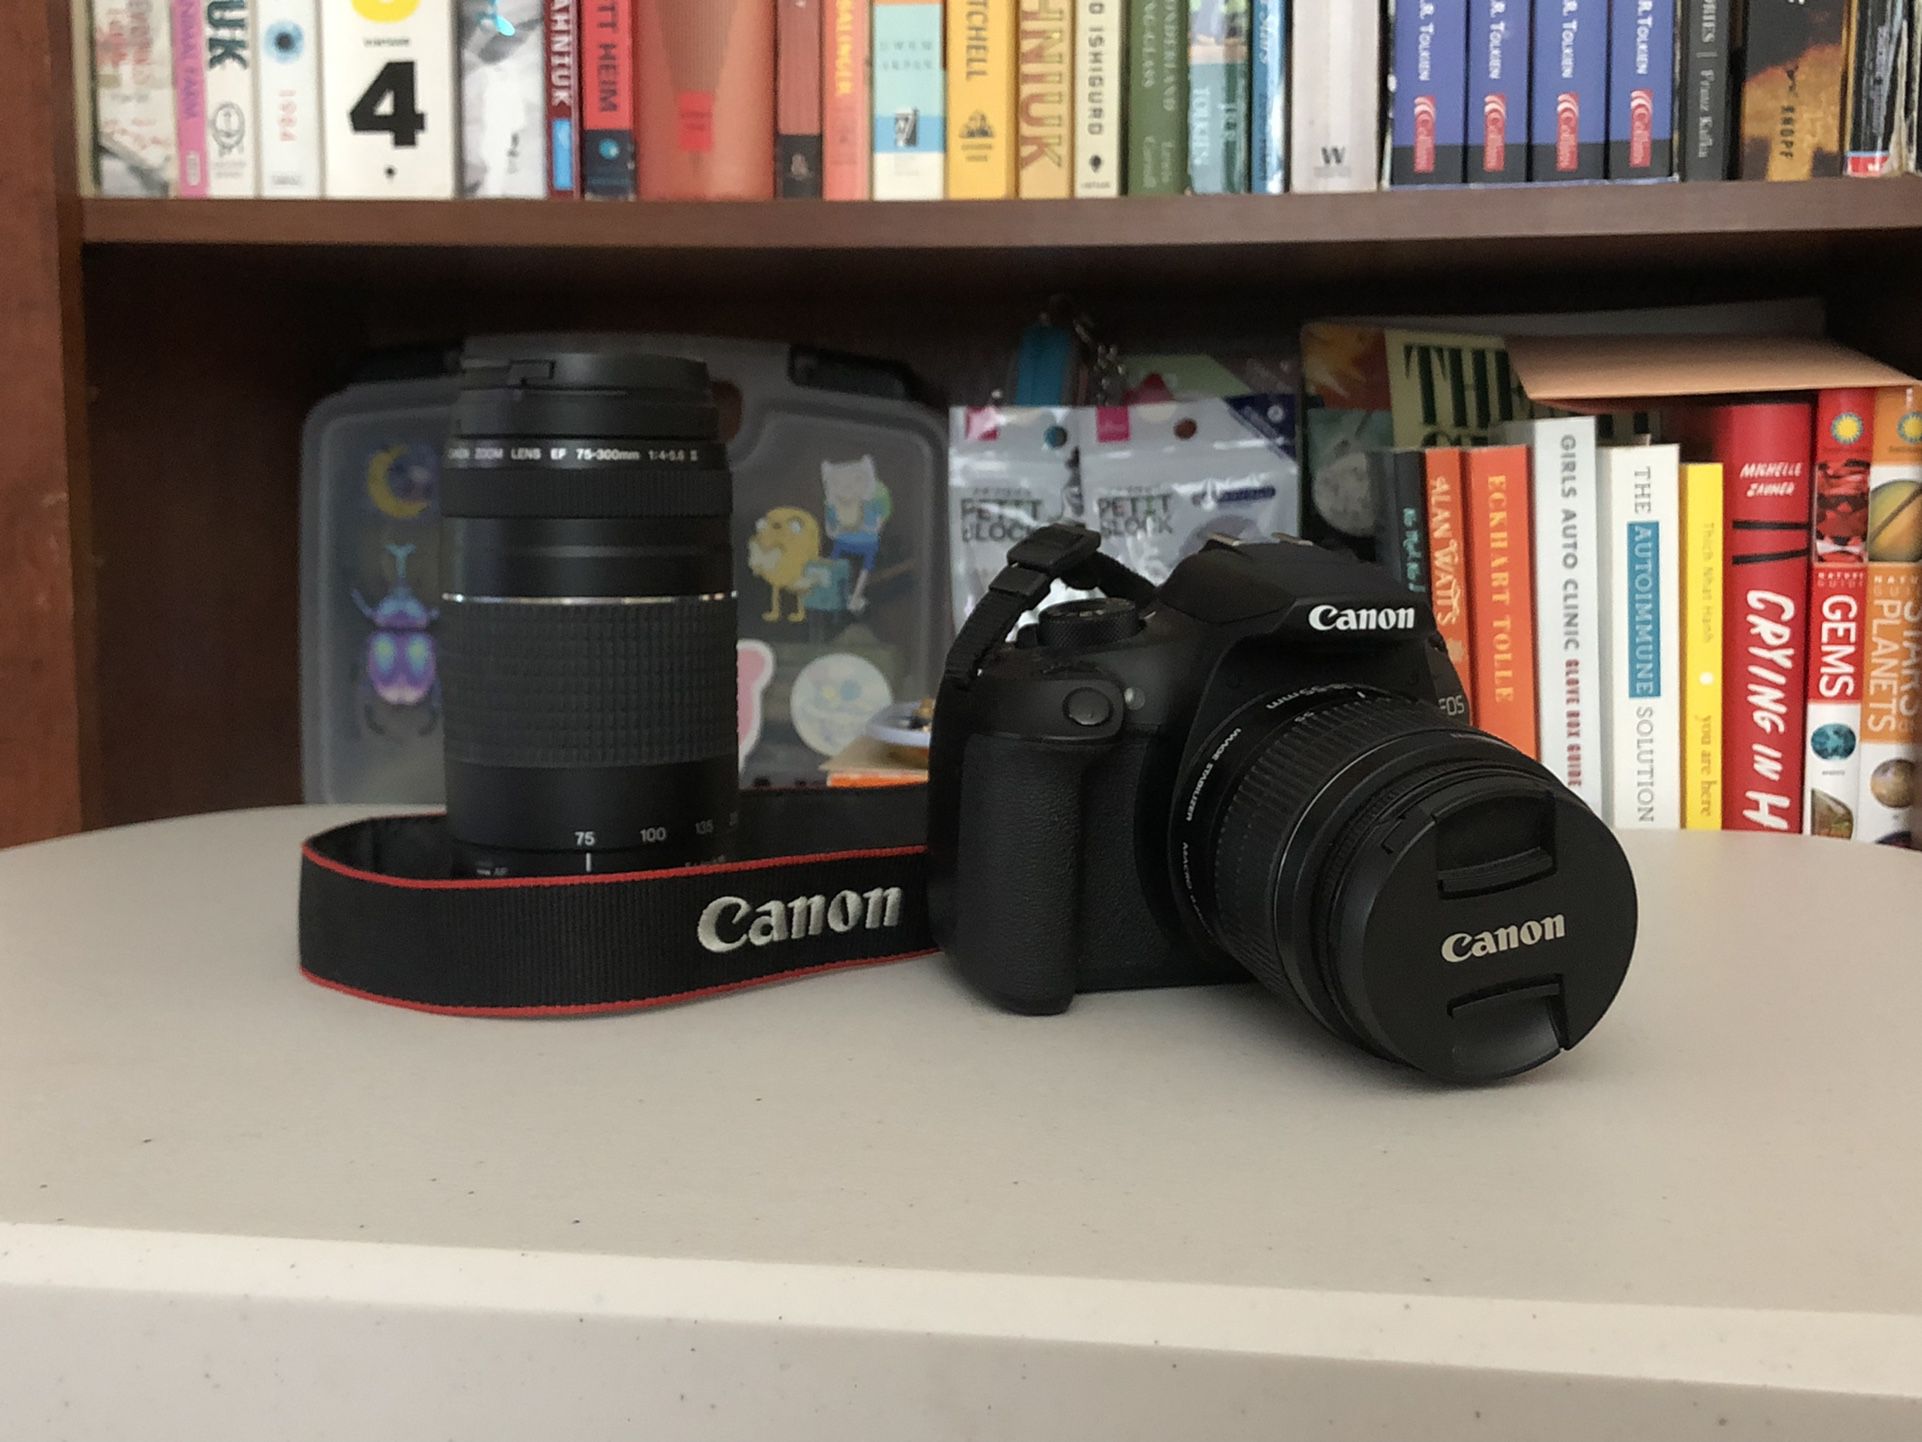 Canon EOS Rebel T6 DSLR and 75-300mm f/4-5.6 III Telephoto Lens